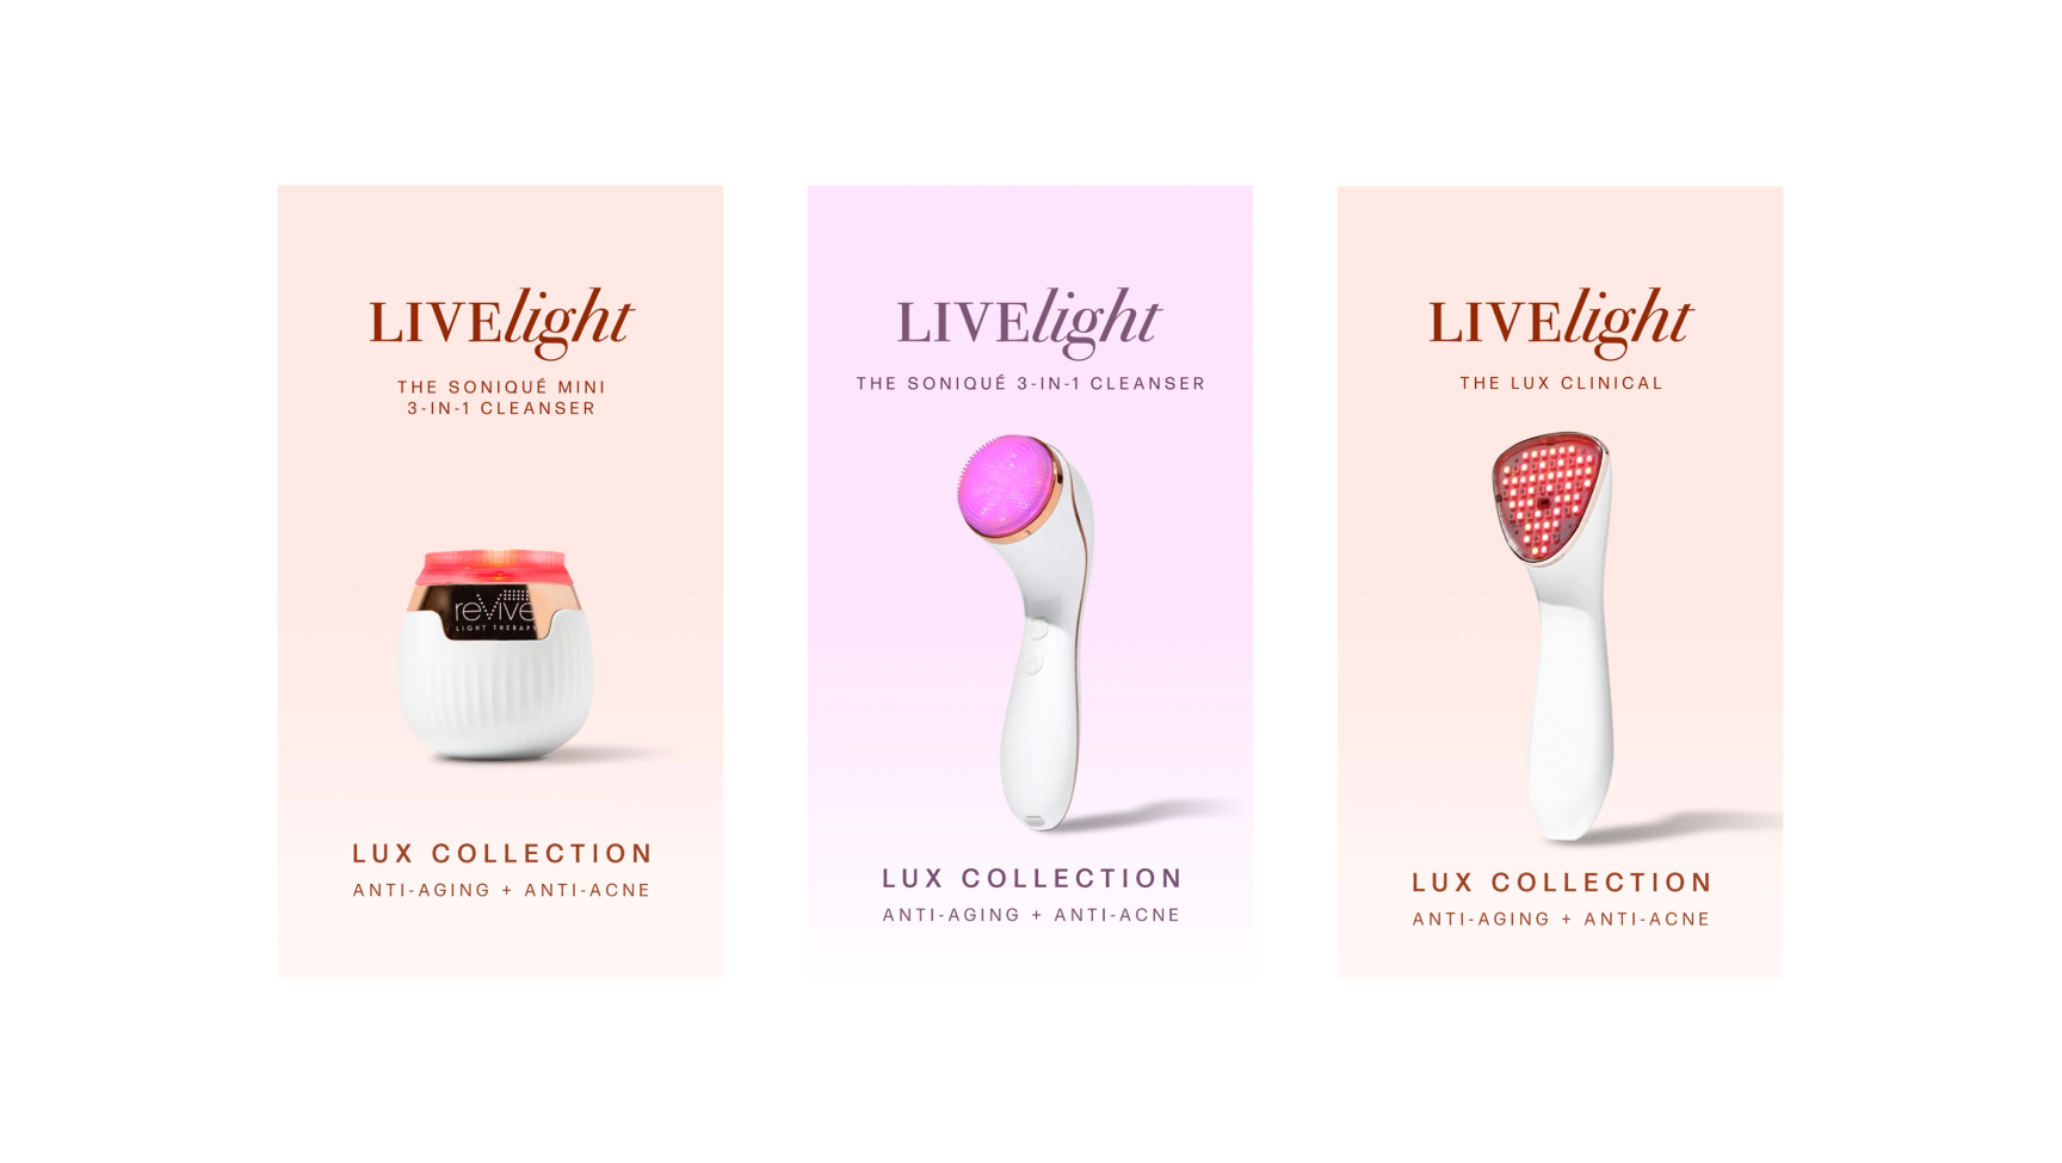 LIVElight Lux Collection Skincare Devices